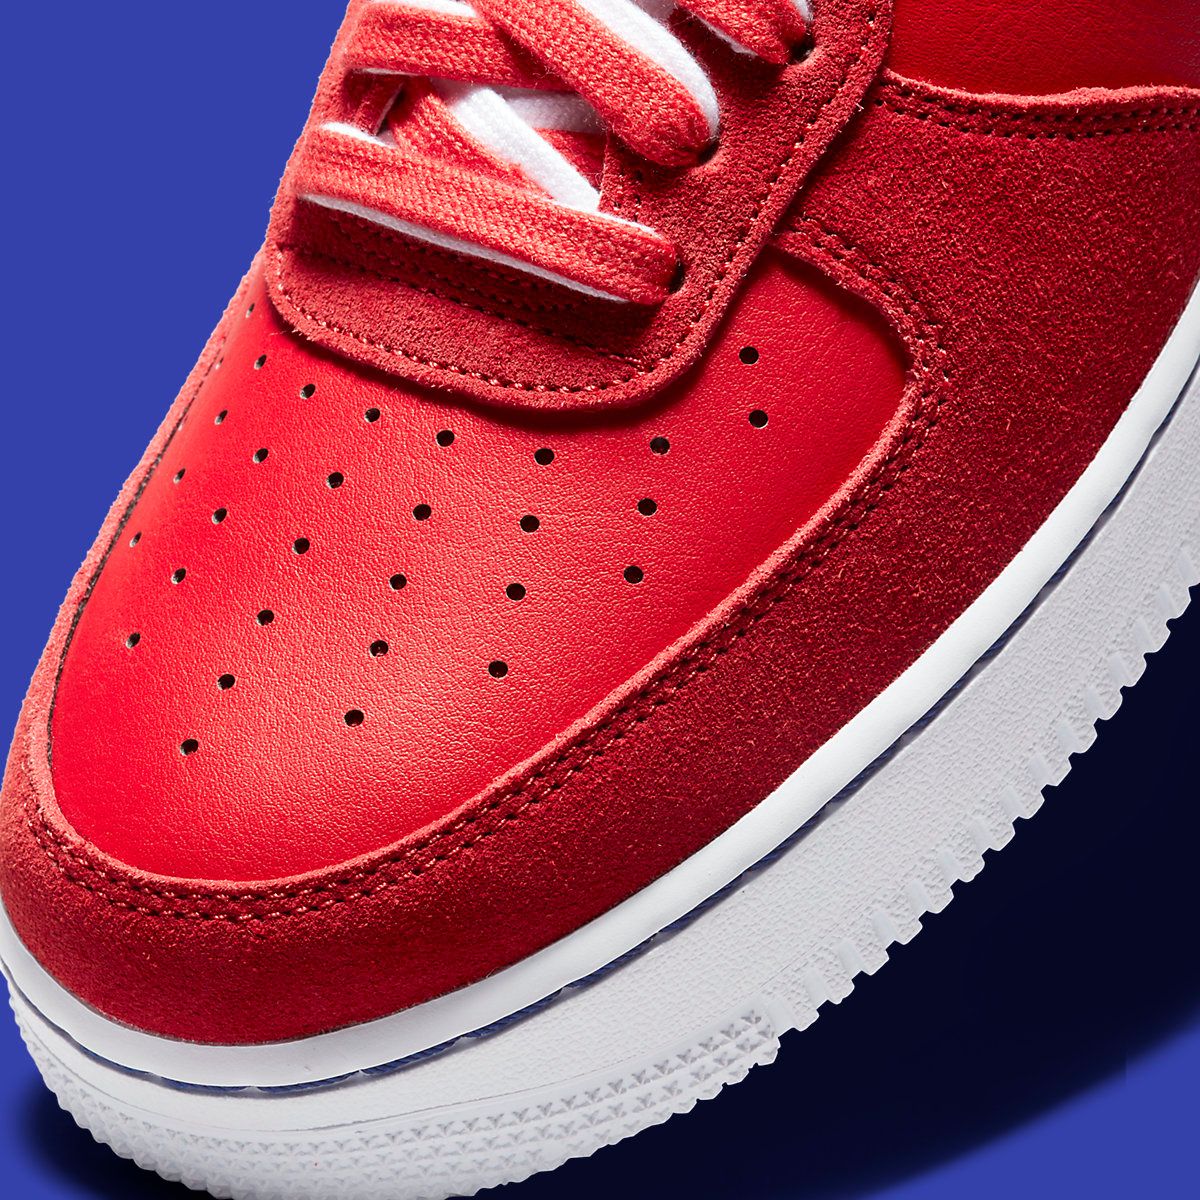 Air Force 1 '07 LV8 'First Use - University Red